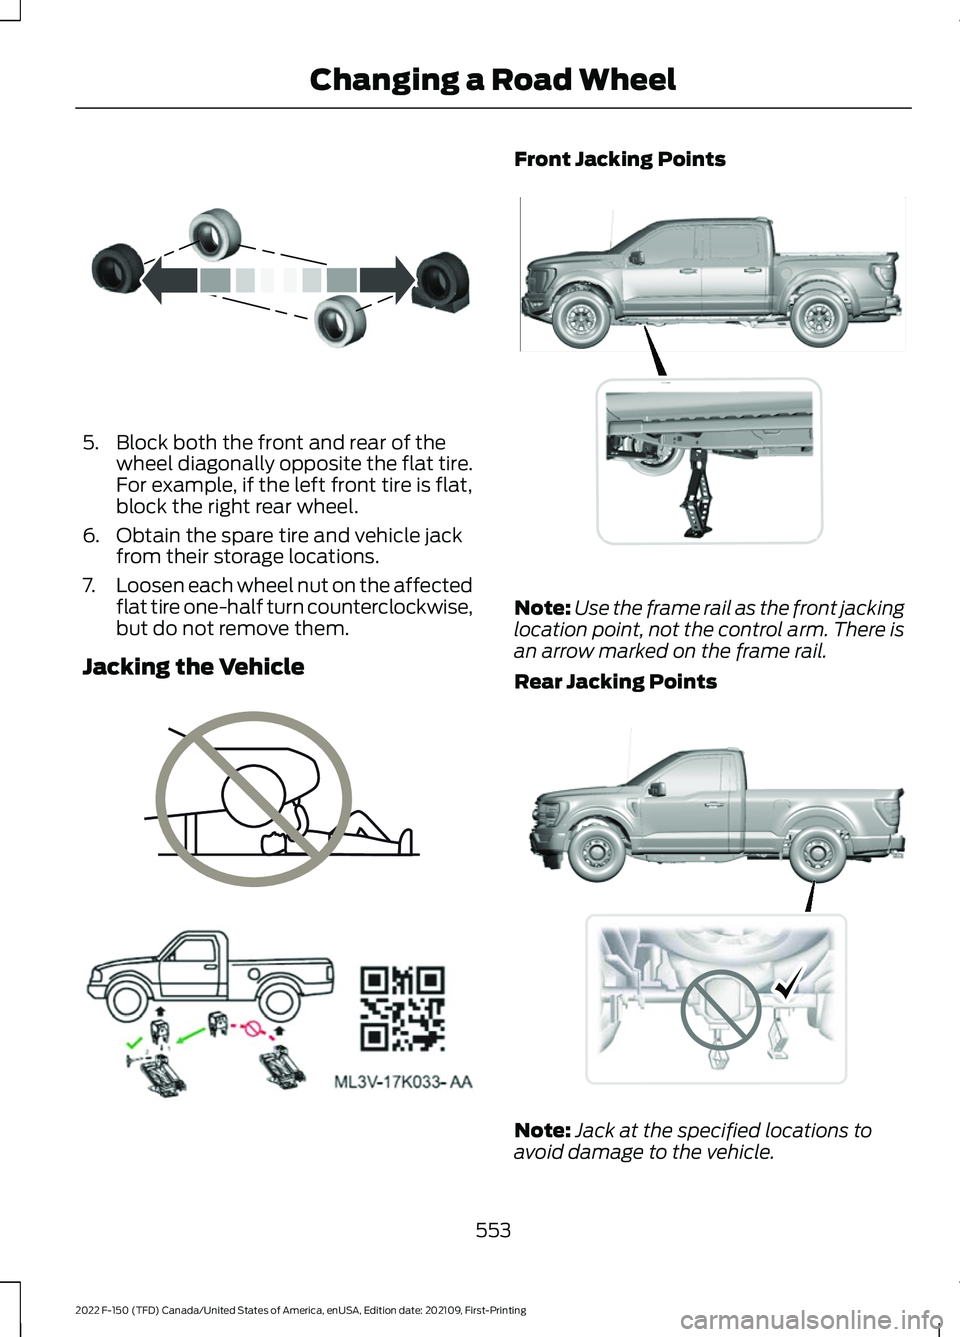 FORD F-150 2022  Owners Manual 5. Block both the front and rear of the
wheel diagonally opposite the flat tire.
For example, if the left front tire is flat,
block the right rear wheel.
6. Obtain the spare tire and vehicle jack from